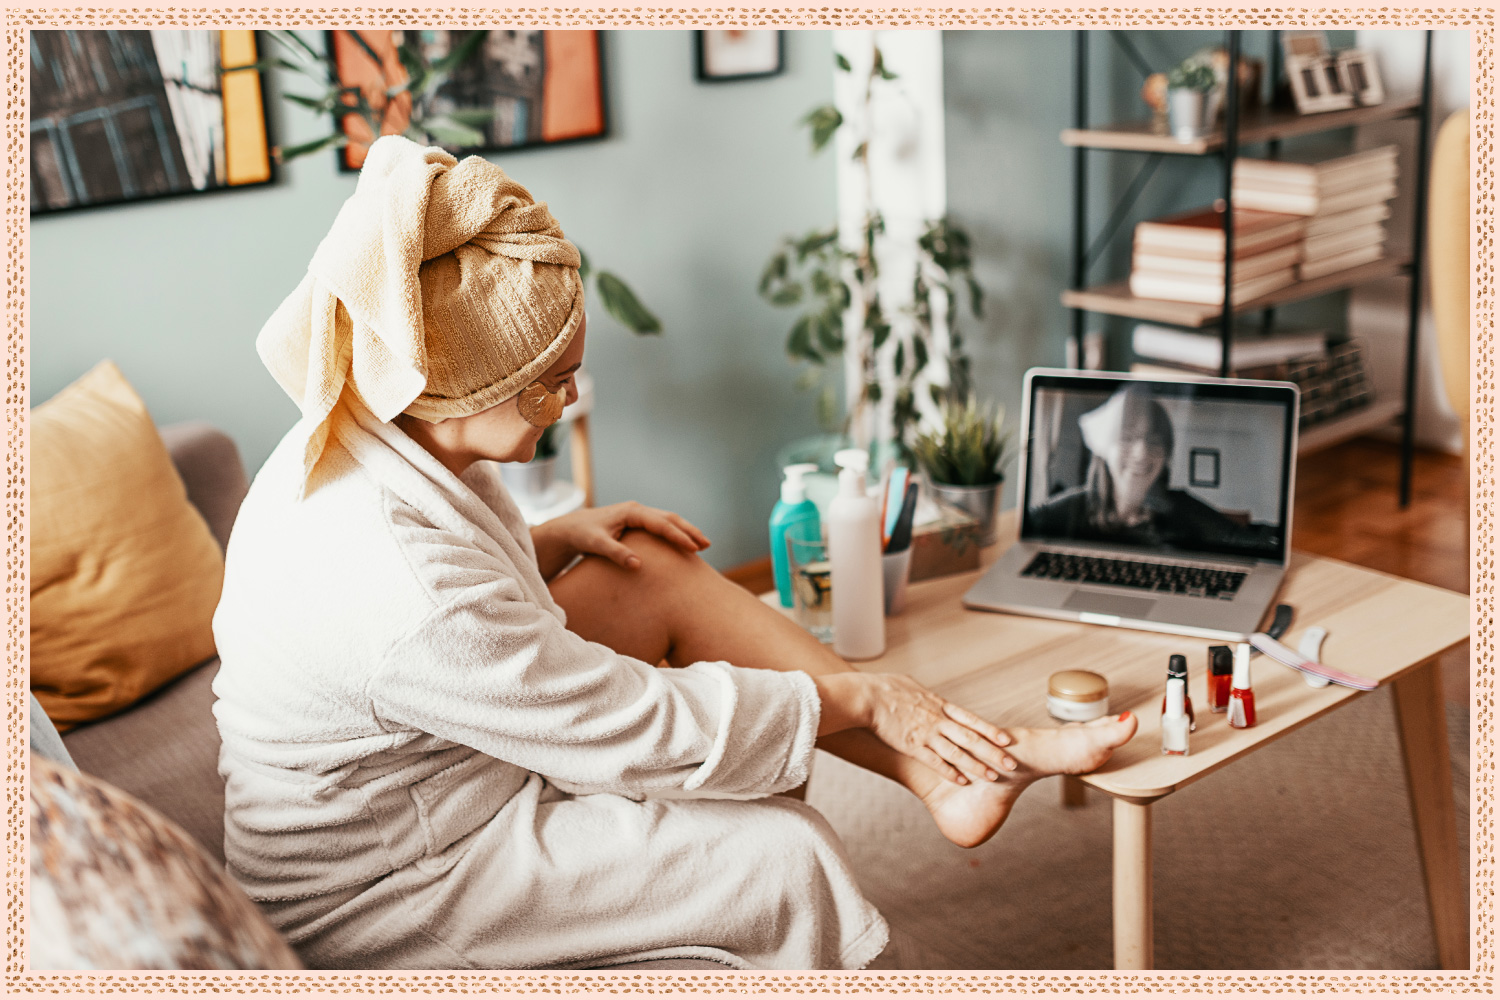 woman with towel on head and face mask on video chatting her friend on her laptop